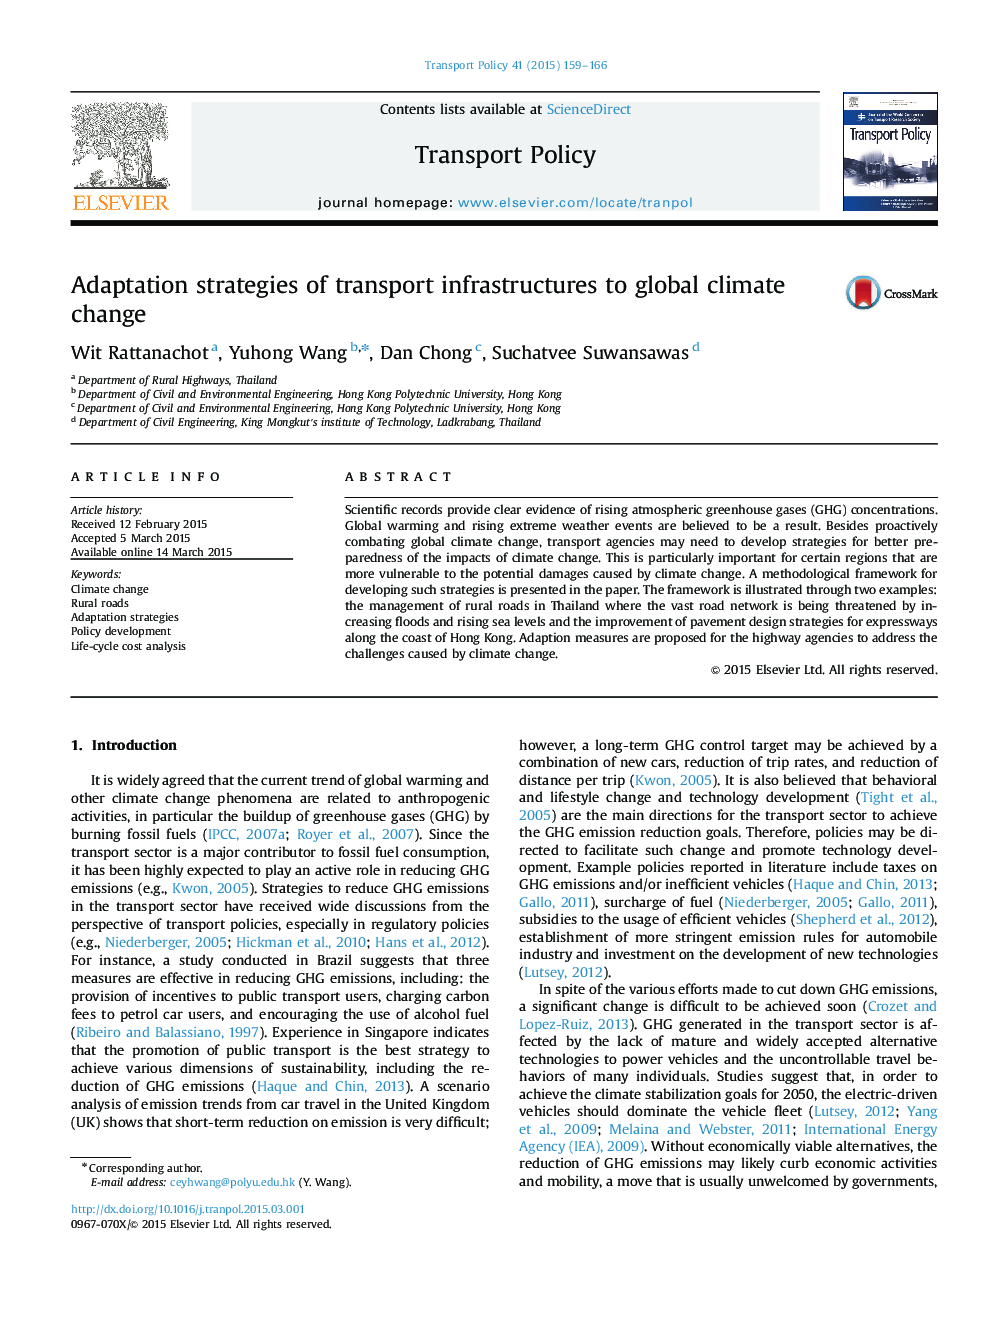 Adaptation strategies of transport infrastructures to global climate change